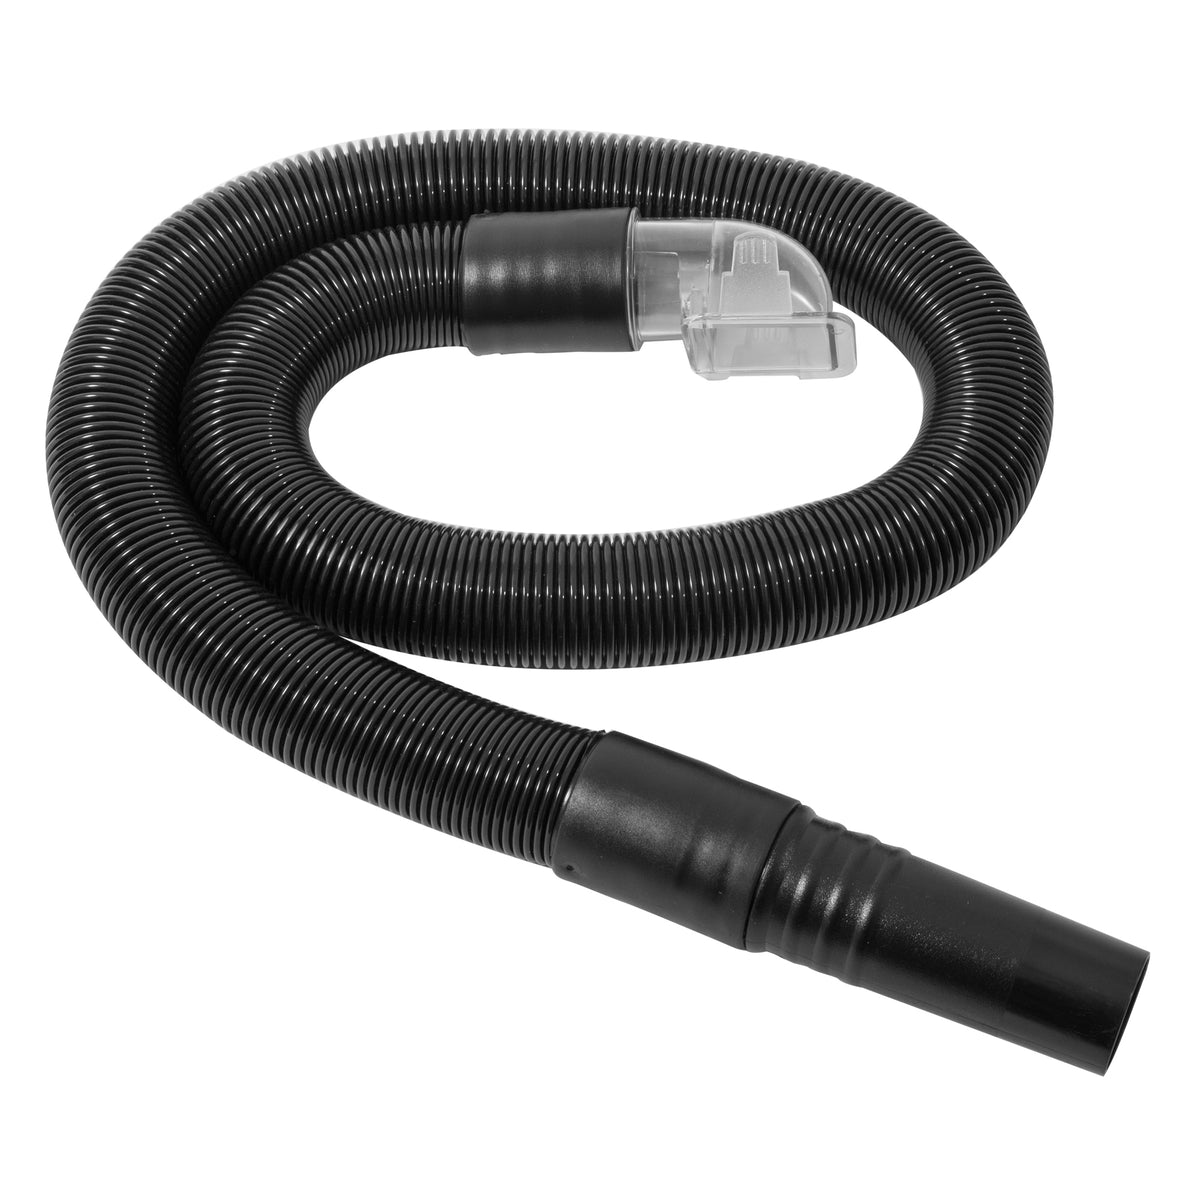 Stretch Hose Assembly 618654 – Sanitaire Commercial